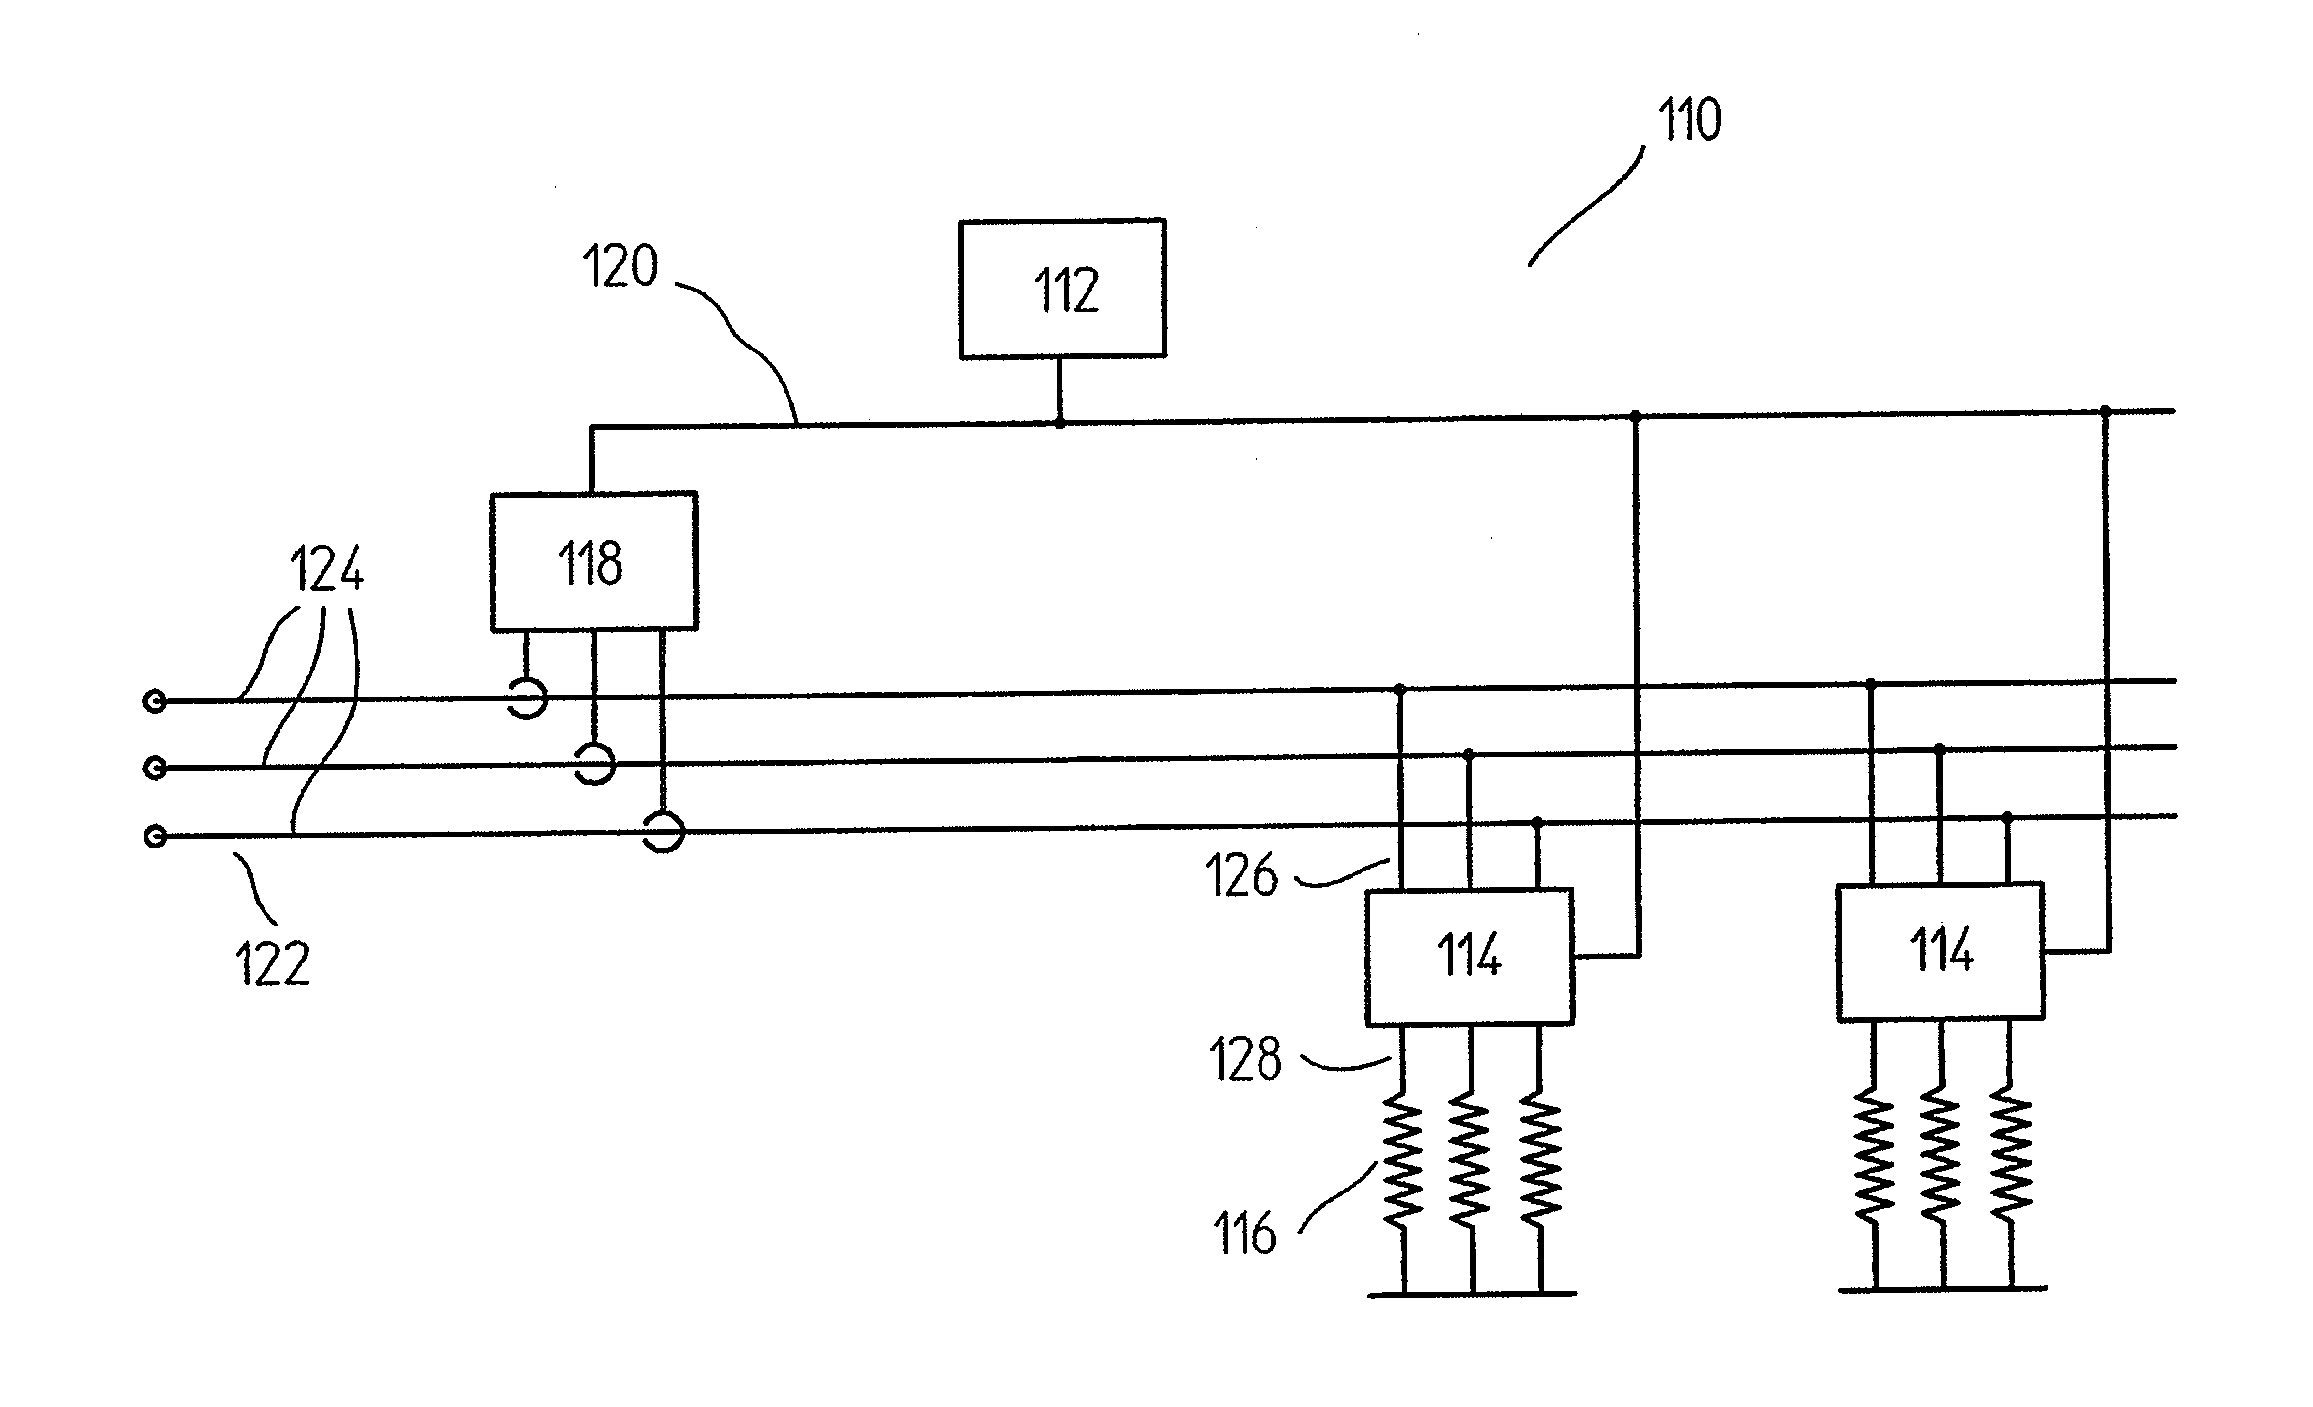 Energy-optimized machine control system for cleaning apparatuses